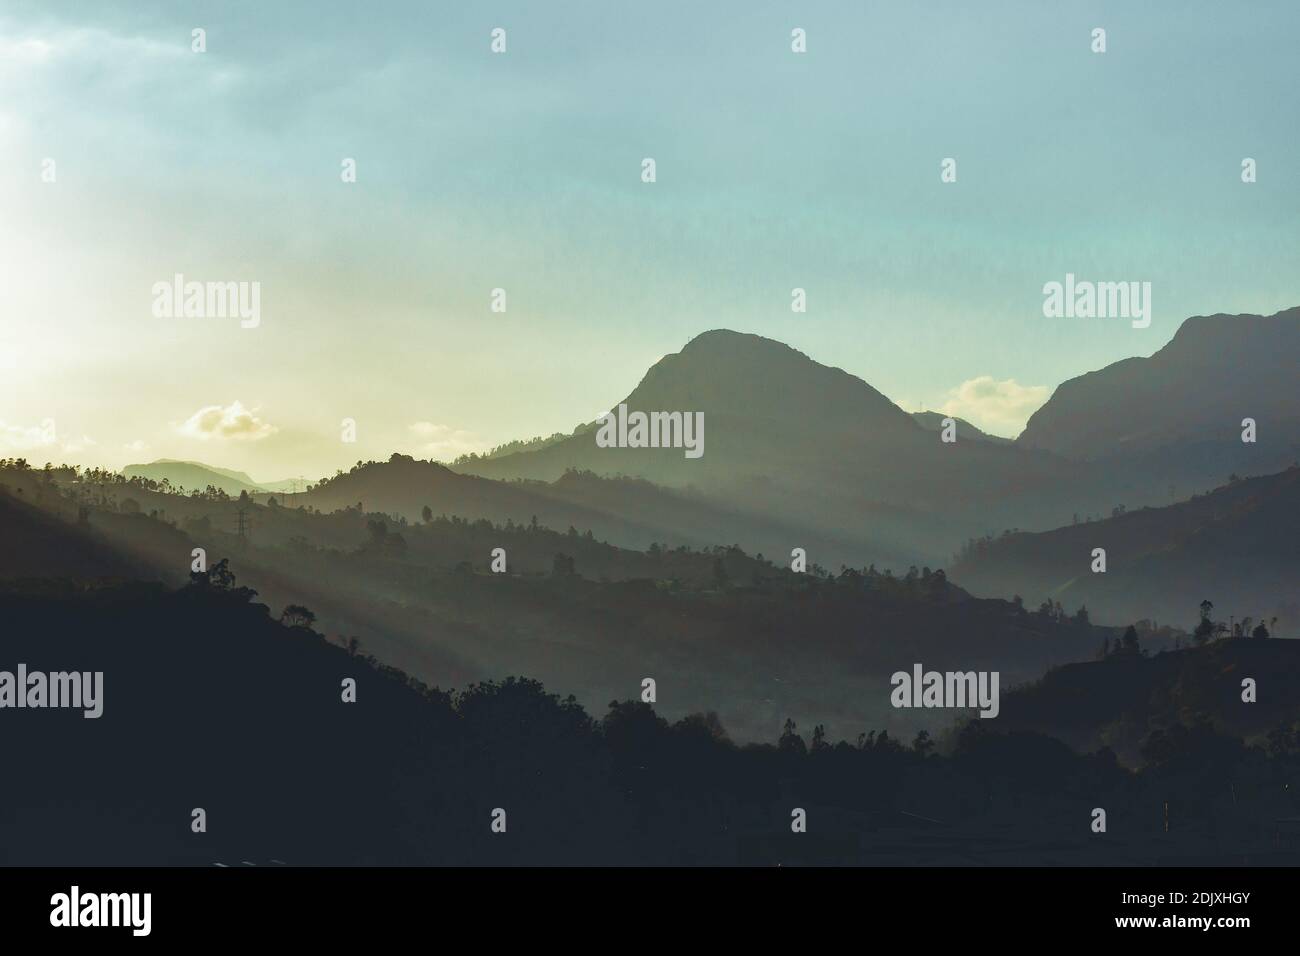 Scenic View Of Silhouette Mountains Against Sky During Sunset Stock Photo